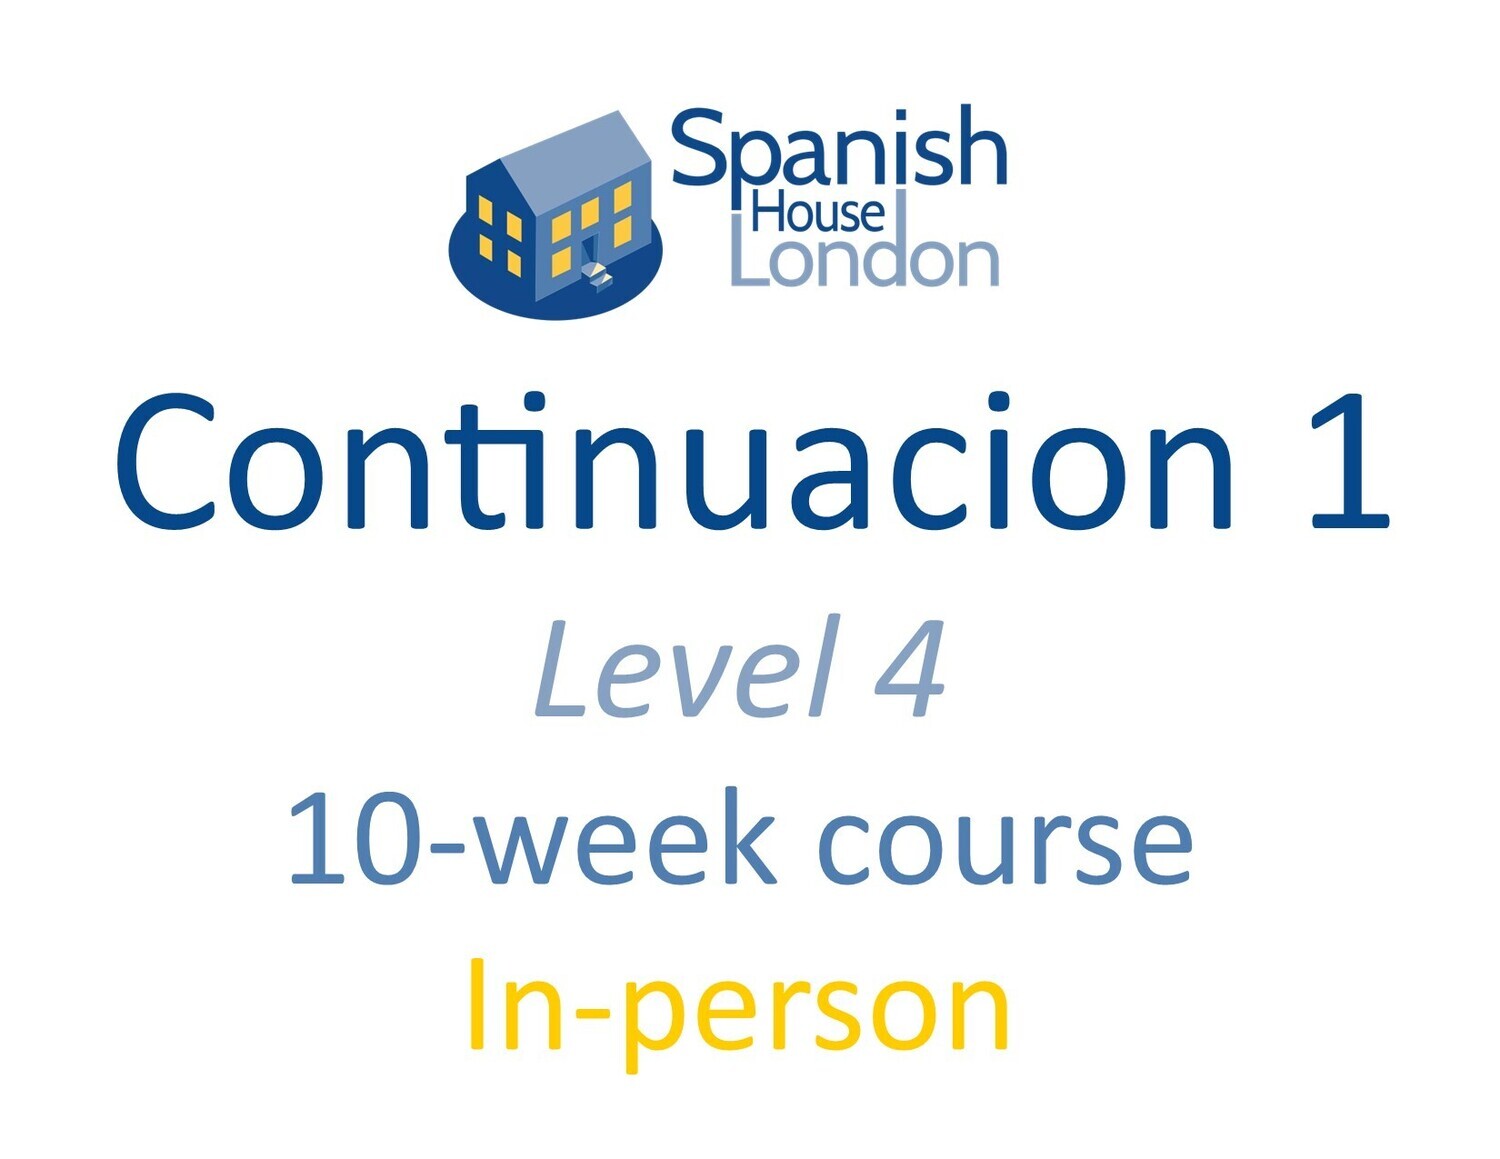 Continuacion 1 Course starting on 9th January at 7.30pm in Clapham North